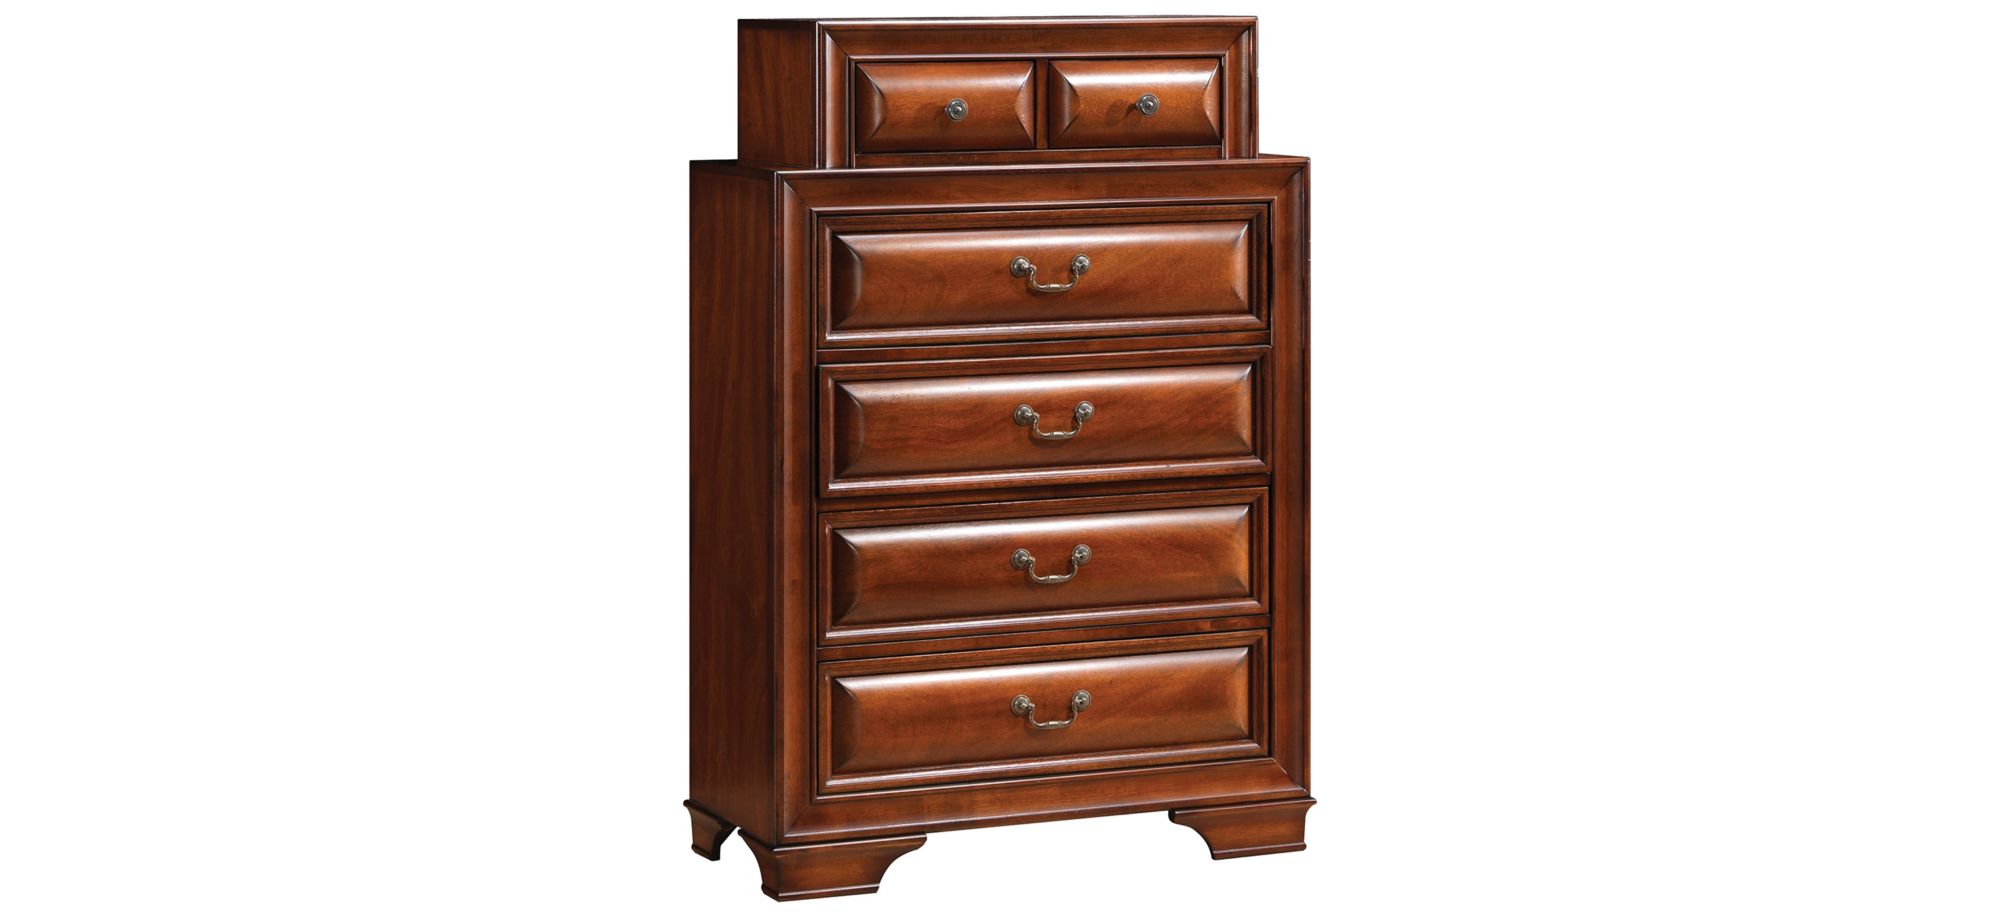 Sarasota Bedroom Chest in Light Cherry by Glory Furniture